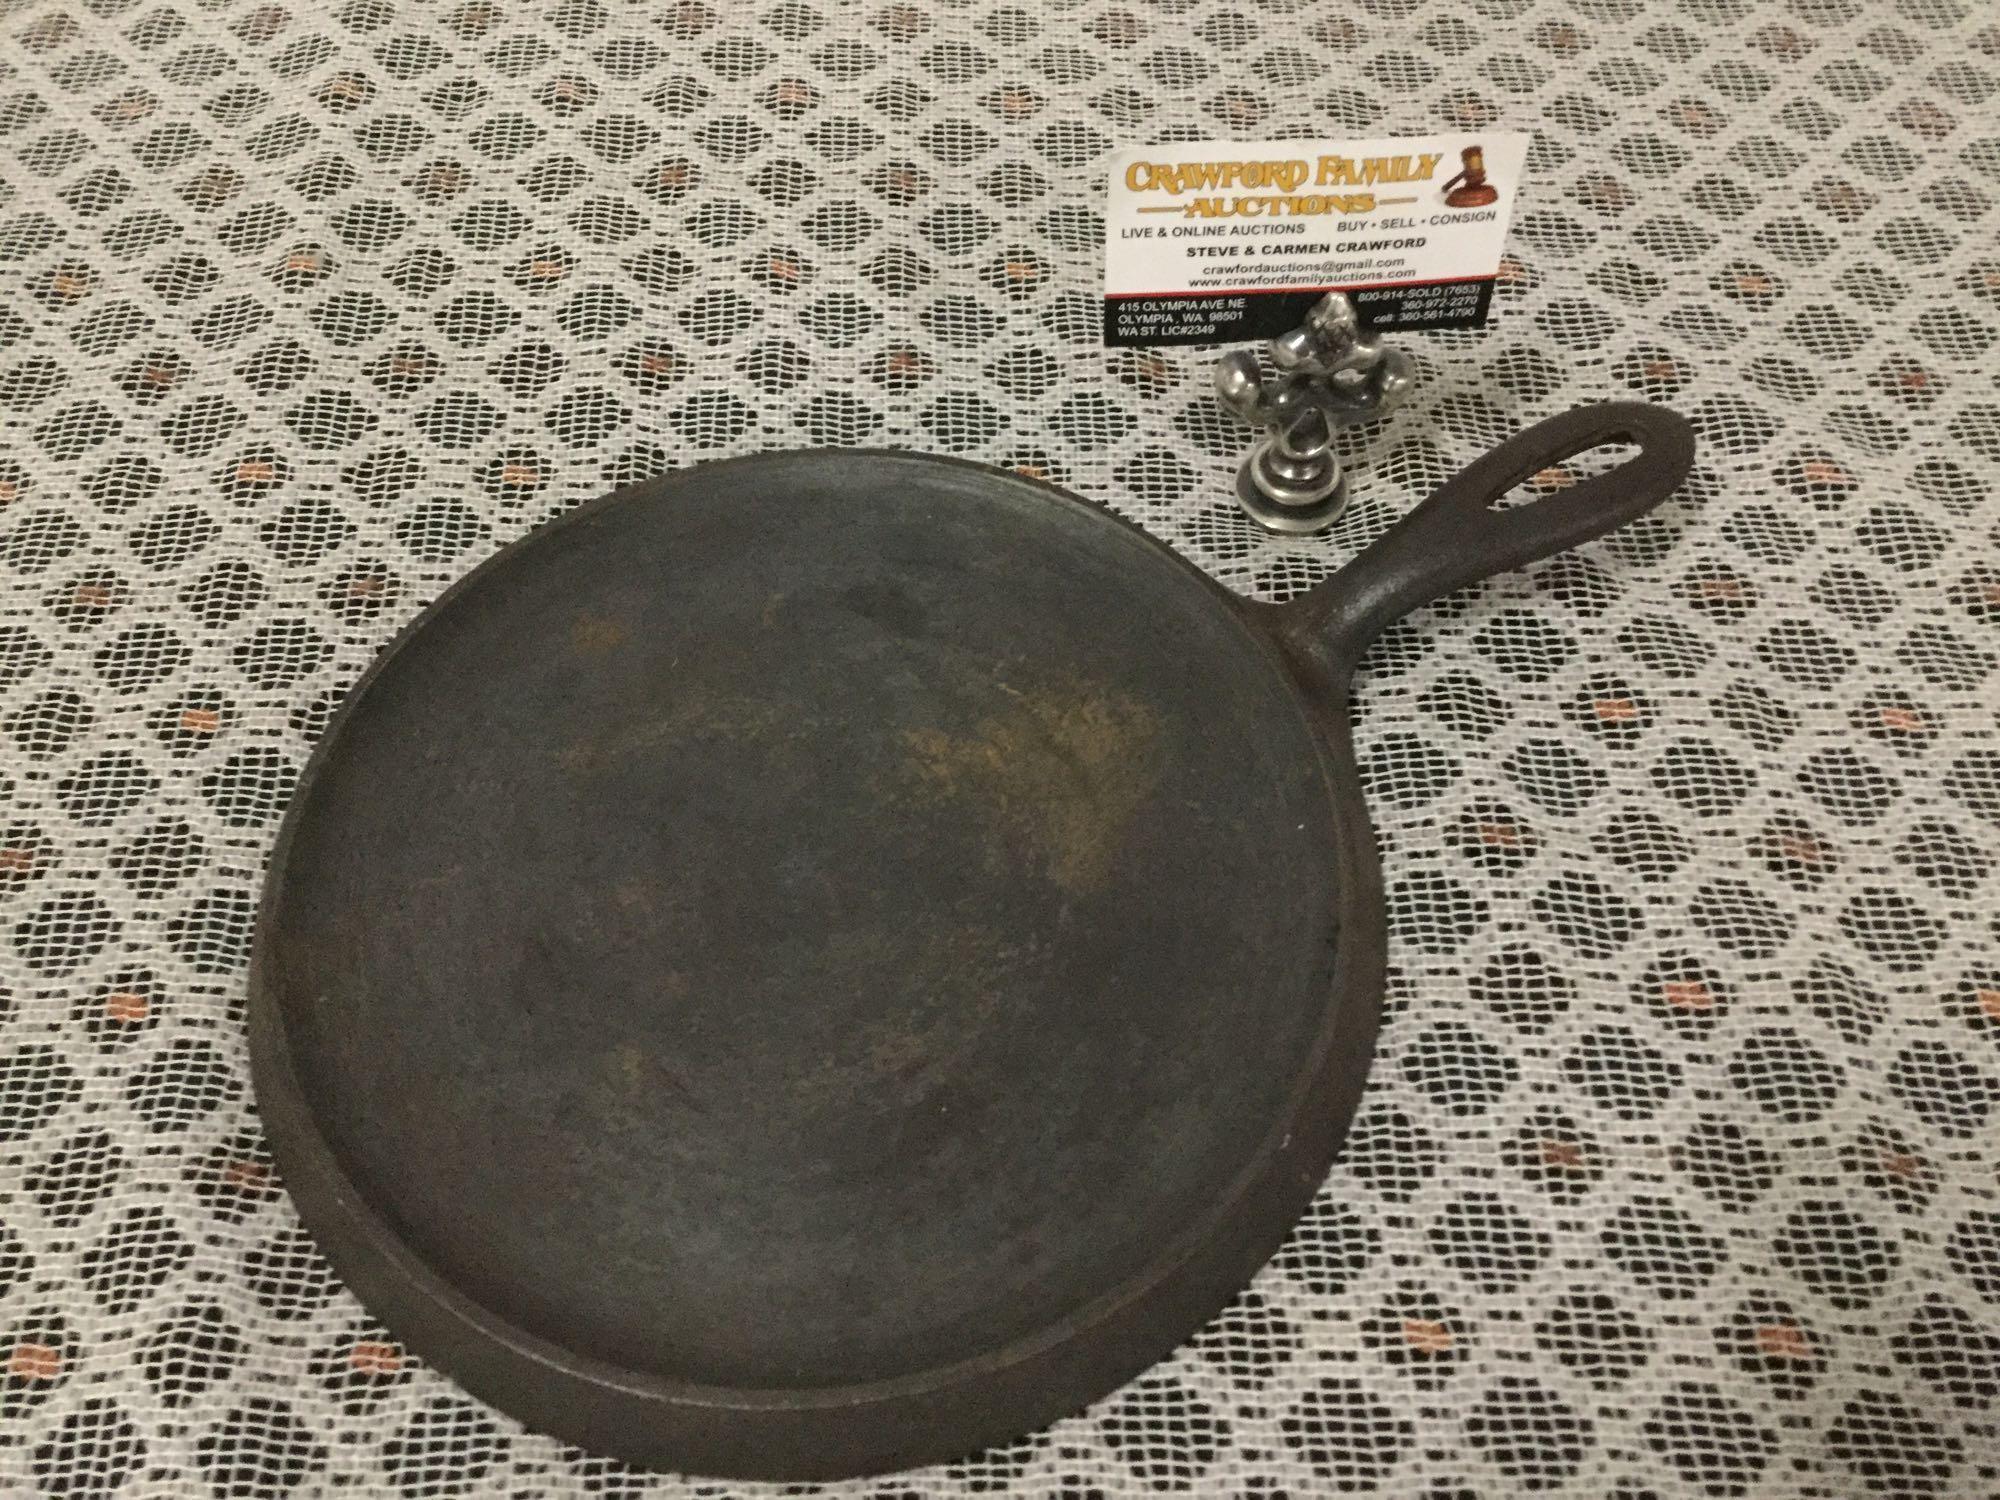 Sold at Auction: CAST IRON FLAT SKILLET FRYING PAN VINTAGE ANTIQUE